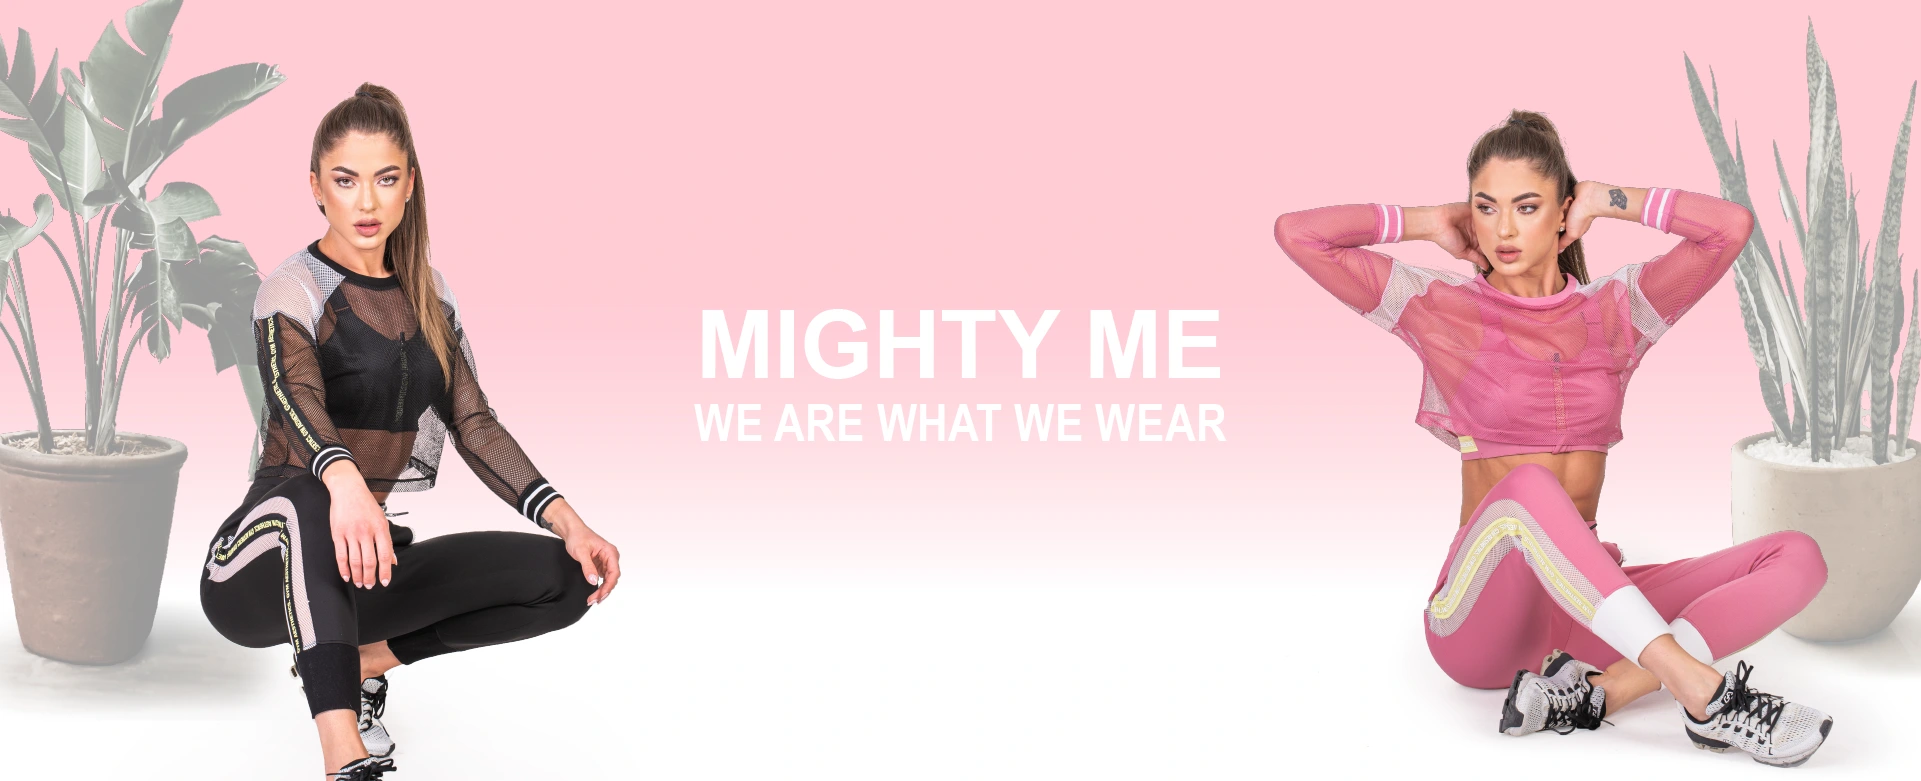 Enjoyable in Every Movement - Mighty Me - We are what we wear | Gym Aesthetics